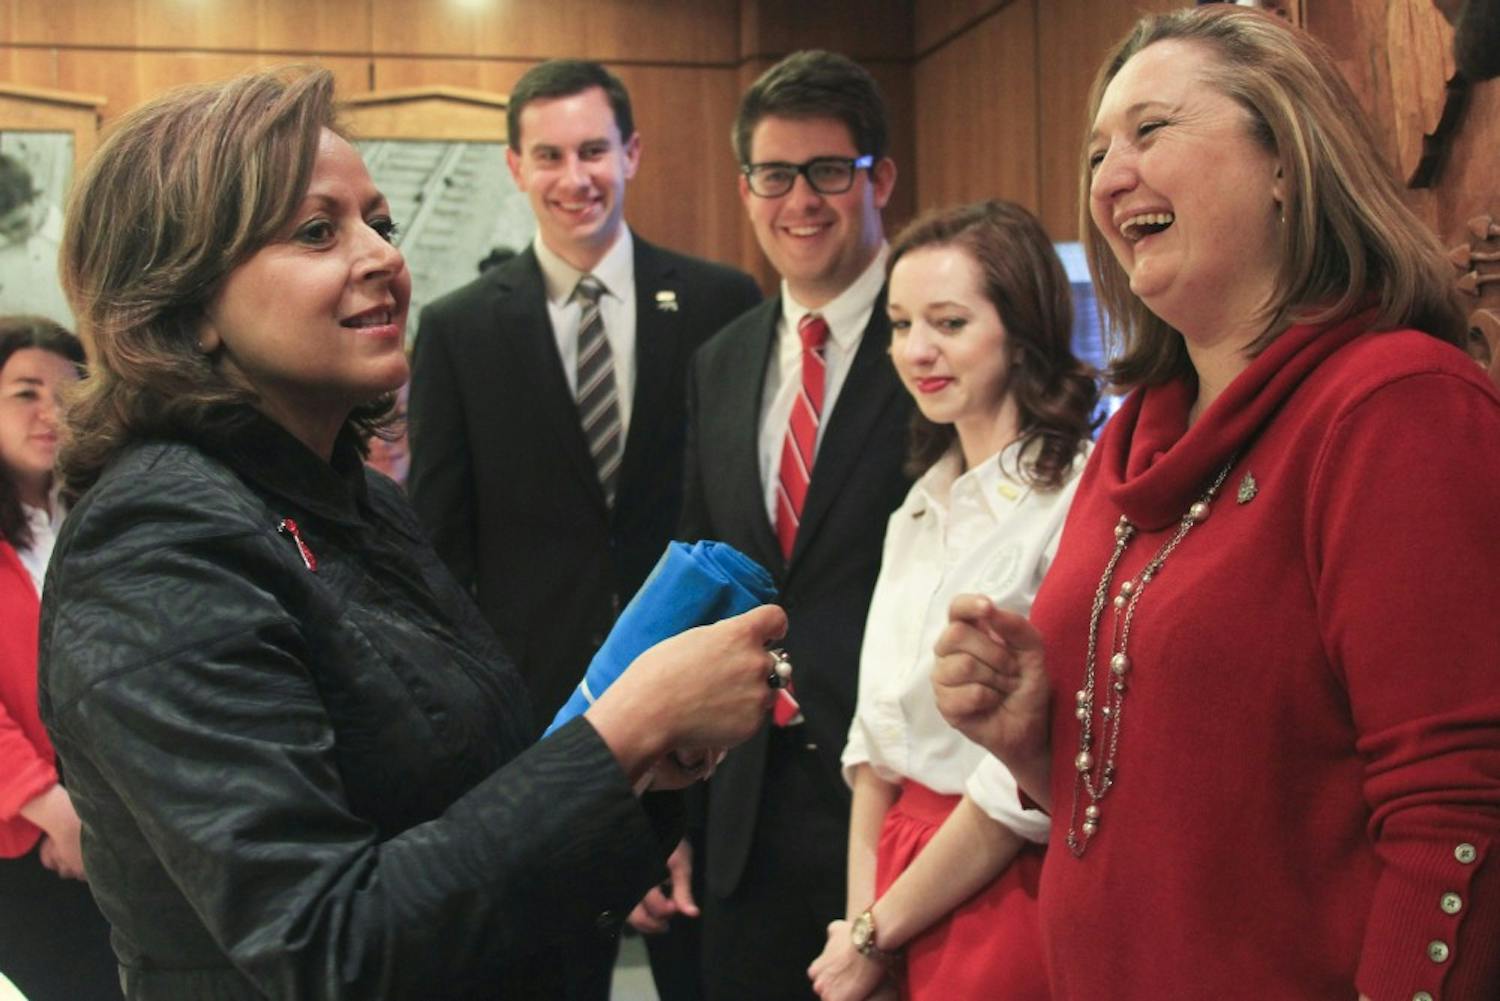 Gov. Susana Martinez greets GPSA President Texanna Martin, right, Rachel Williams and other student government representatives at the State Capitol building in Santa Fe. Monday marked UNM Day at the state Legislature.